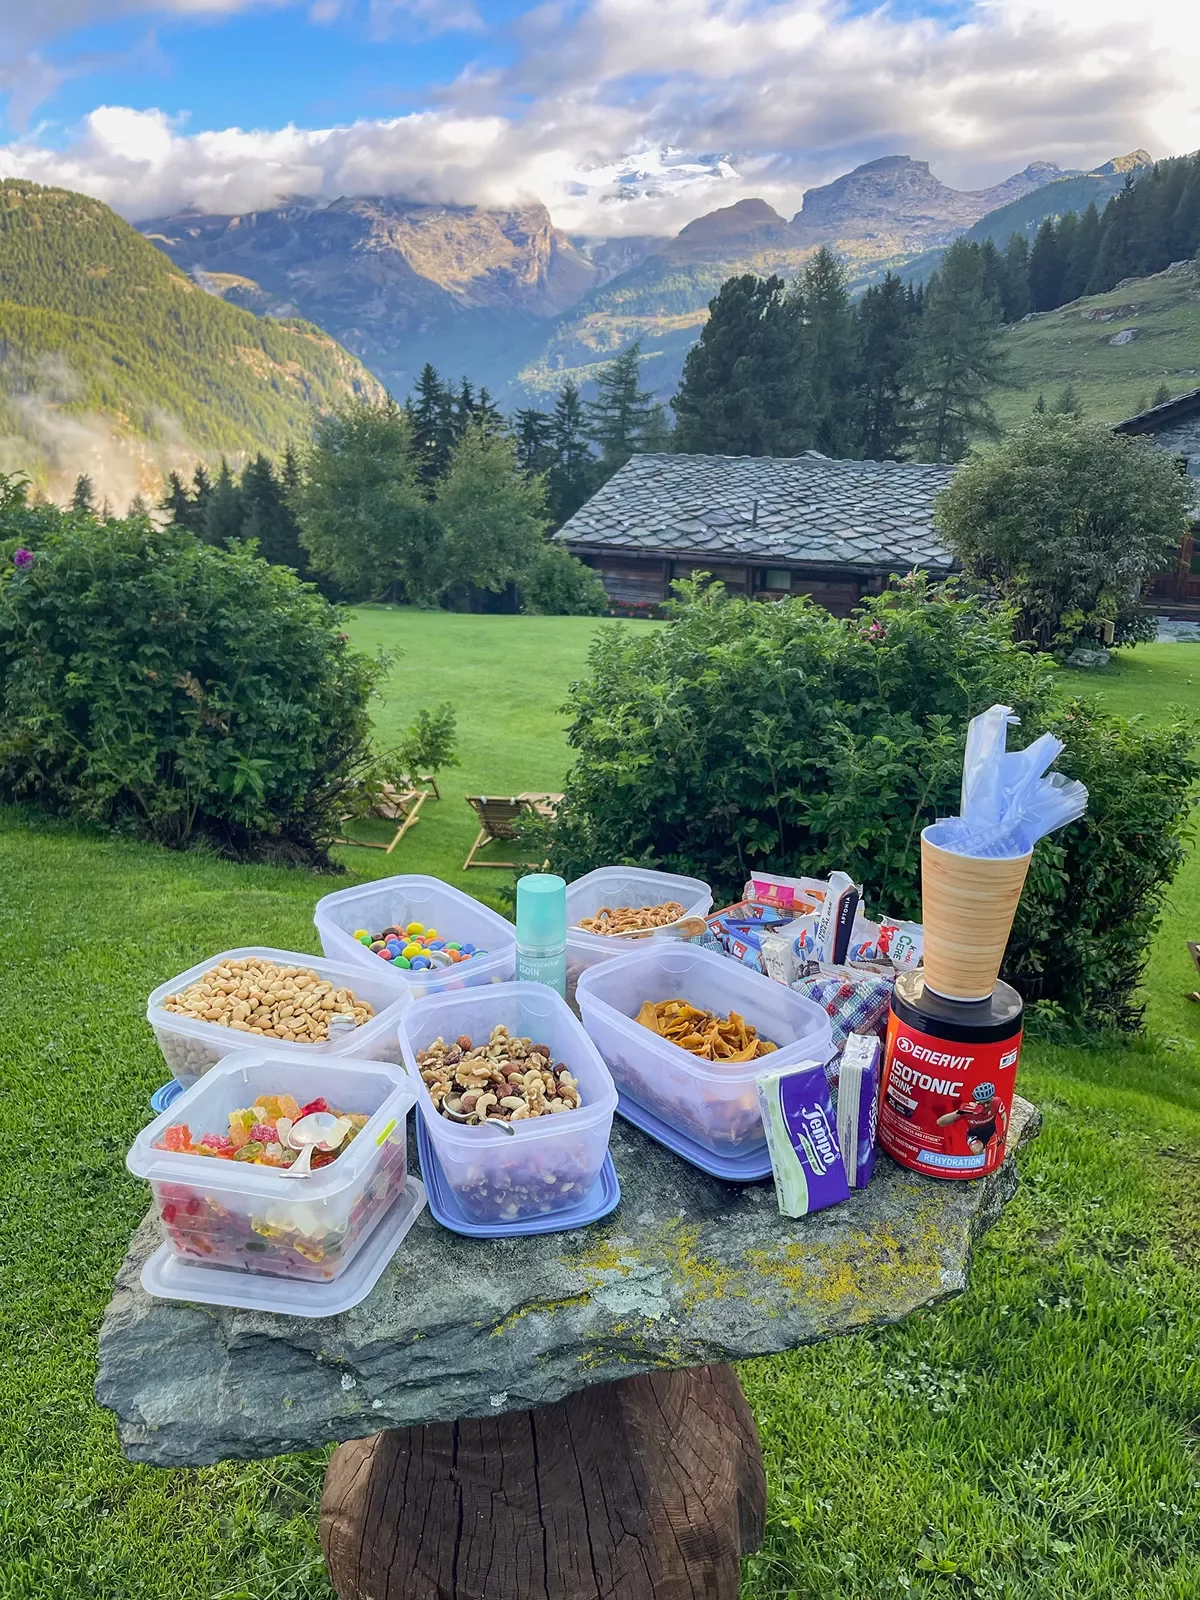 Food containers full of snacks on a rock looking down at a grassy field